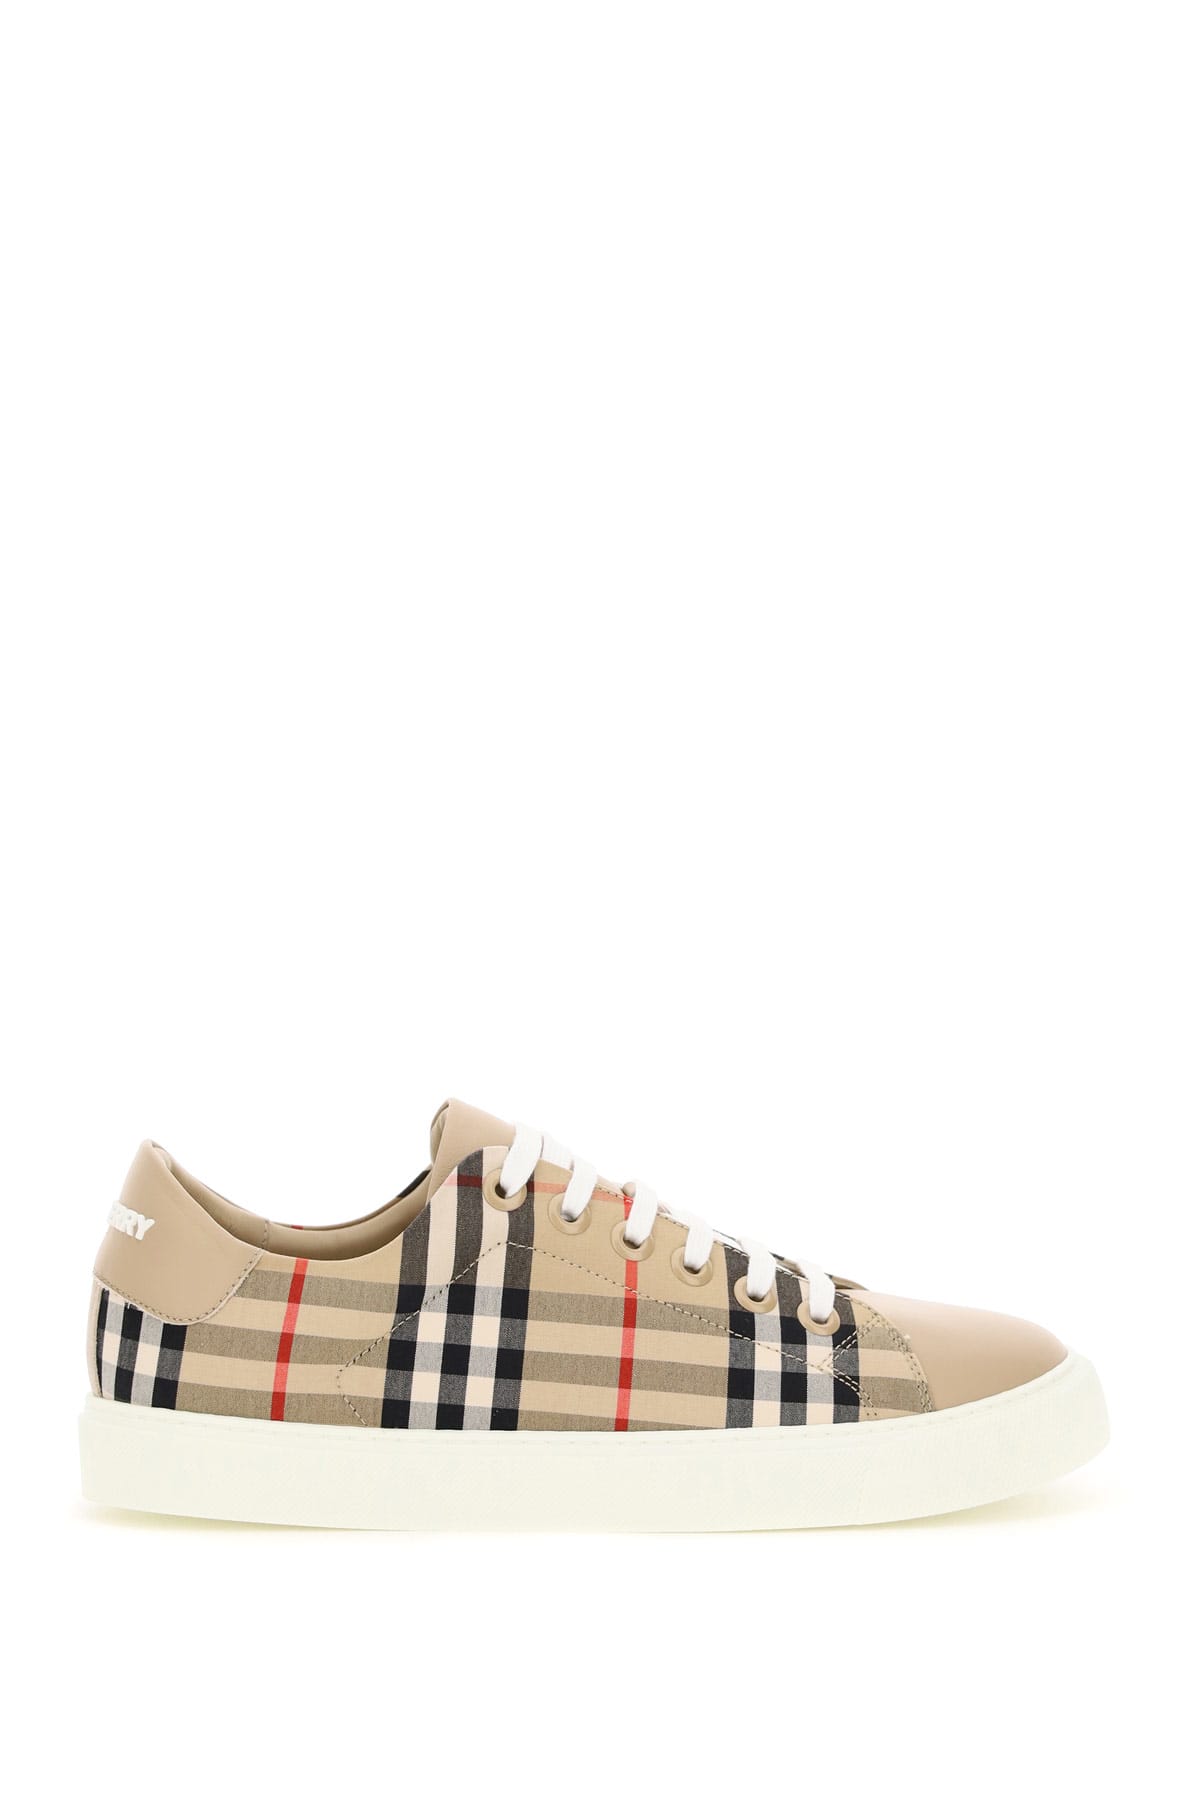 Buy Burberry Sneakers online, shop Burberry shoes with free shipping